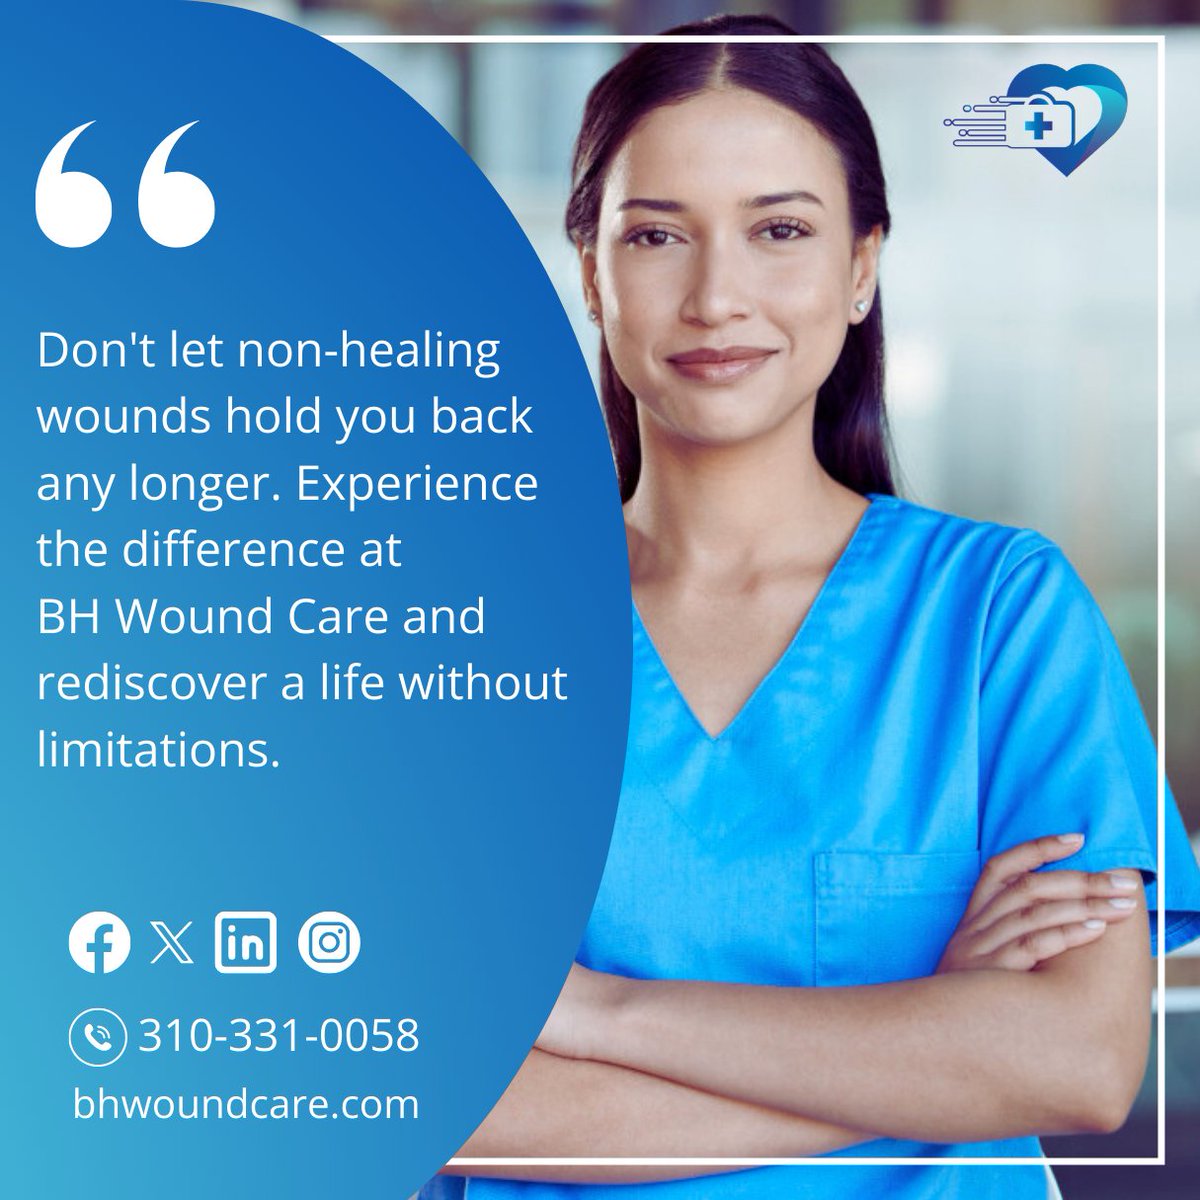 Don't let non-healing wounds hold you back any longer. Experience the difference at BH Wound Care and rediscover life without limitations.
.
.
 #woundspecialists #woundcare #woundhealing #bhwoundcare #woundcarenurses #WoundAssessment #WoundRecovery
#ChronicWounds #SurgicalWounds